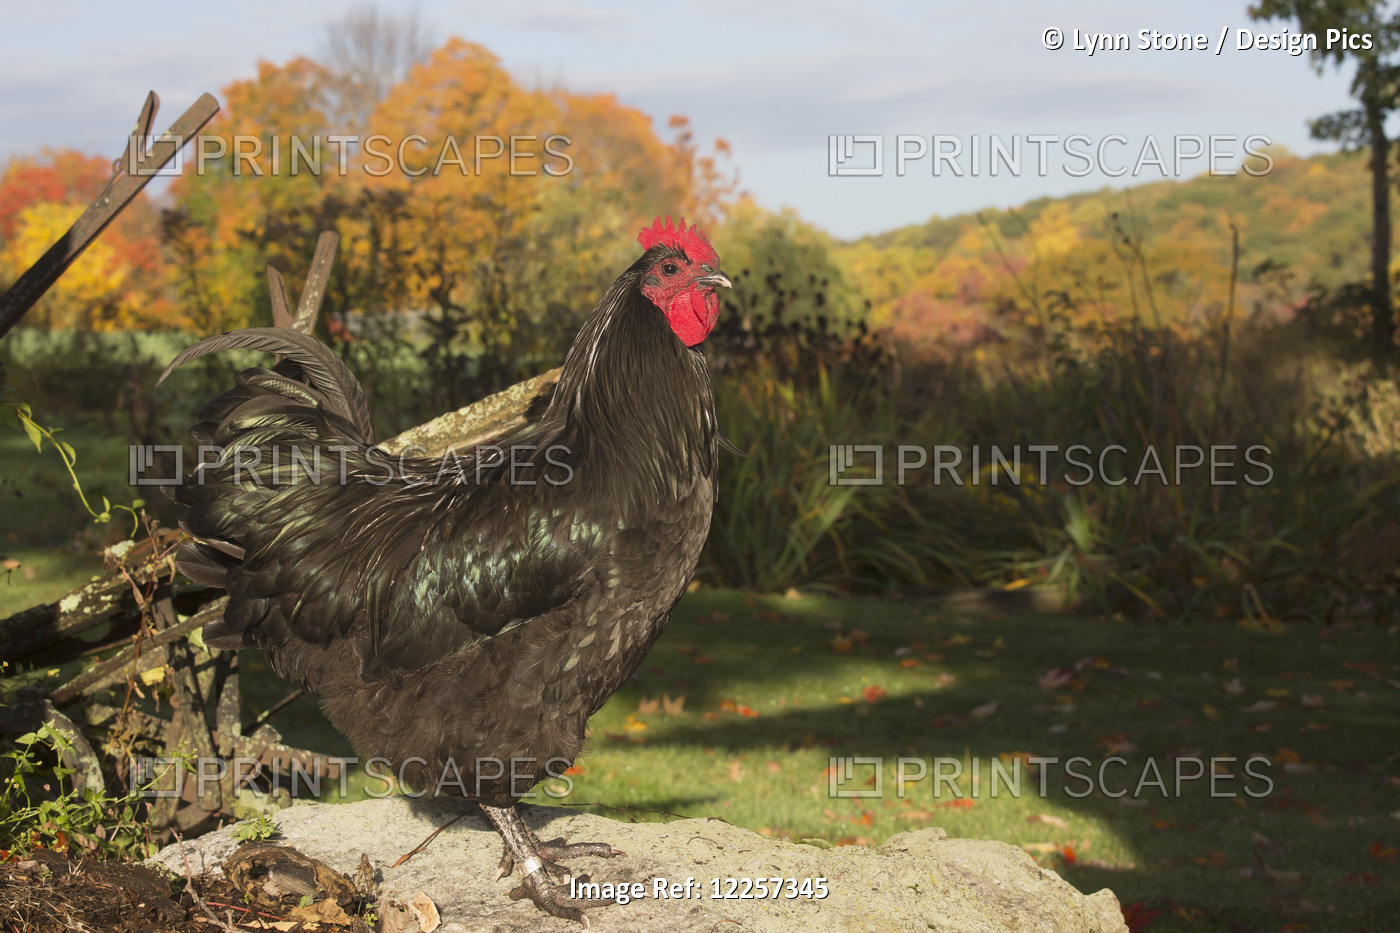 Large Black Australorp Perched On Rock By Old, Wooden Plough In Autumn; ...